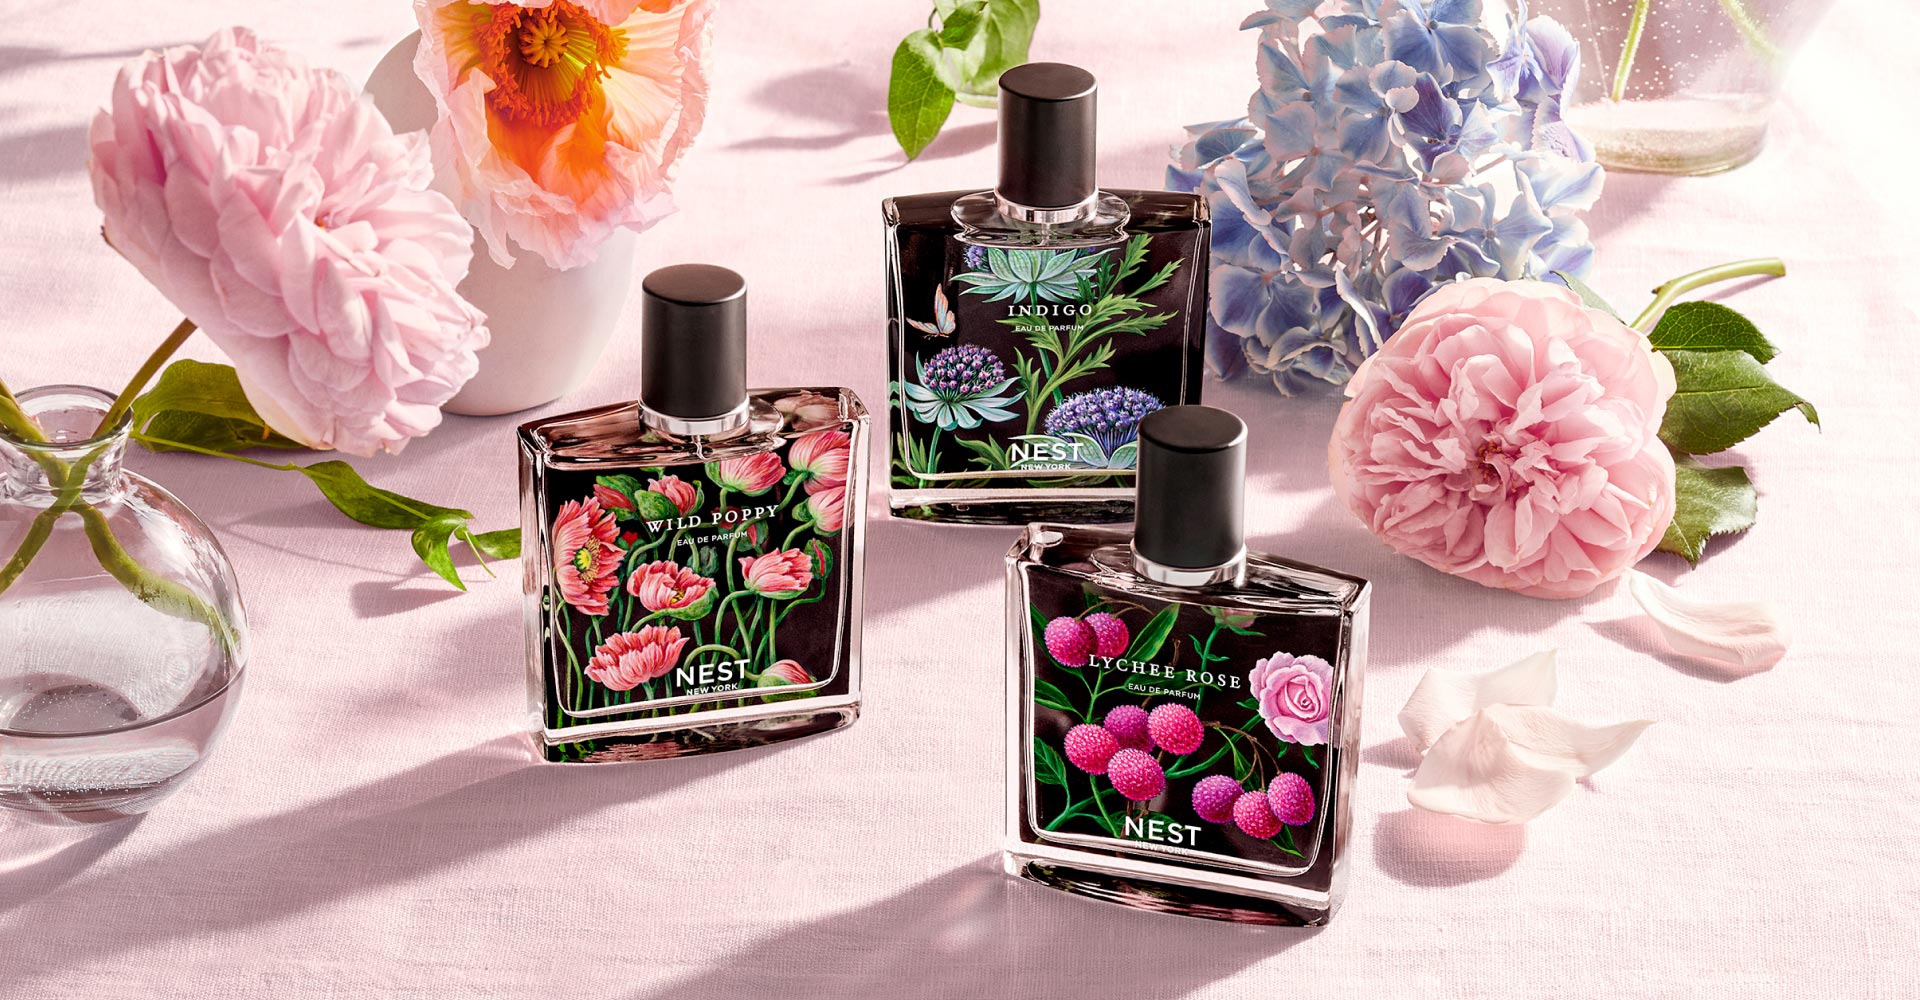 Fine Fragrance: We are leaders in Fine Fragrances